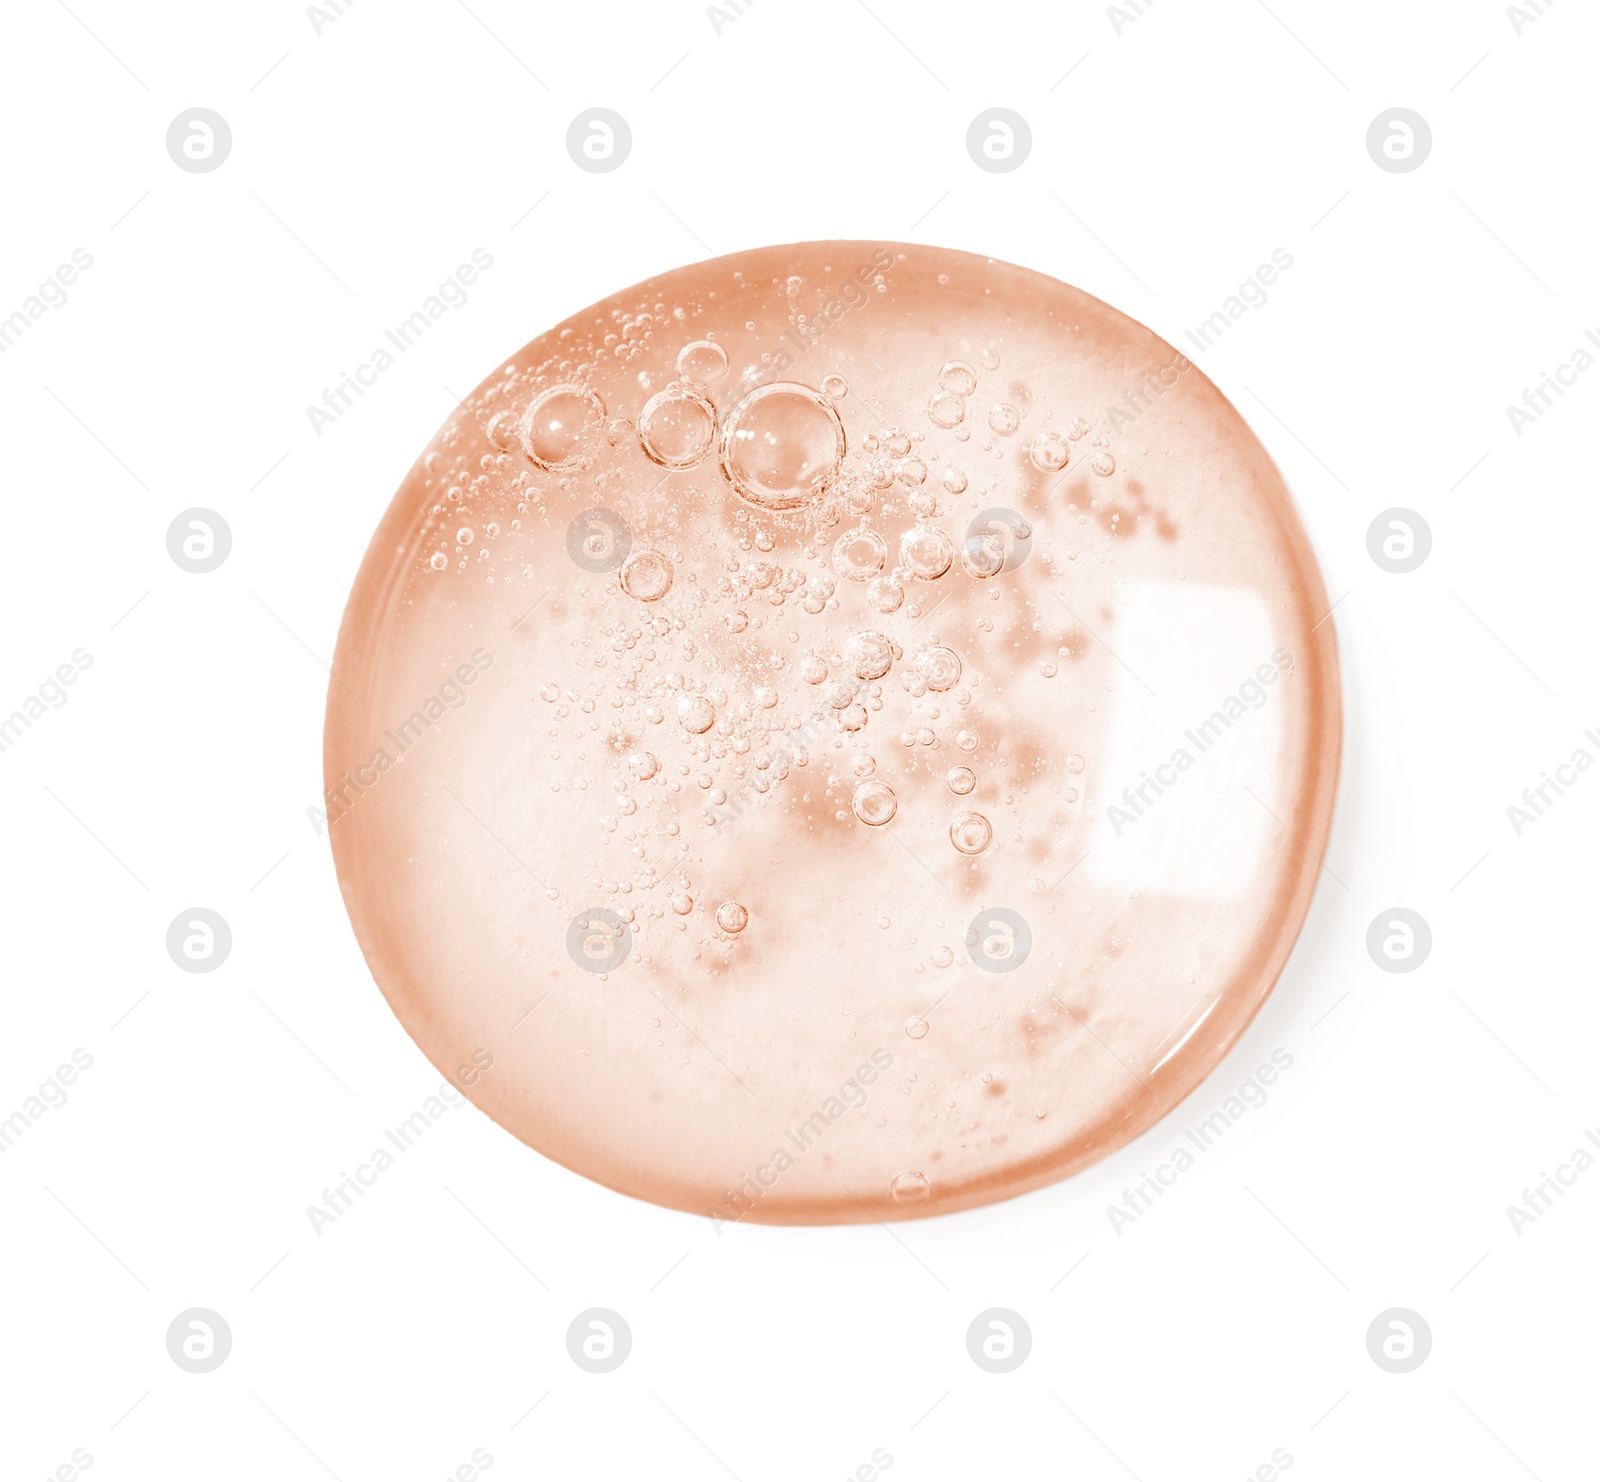 Image of Serum drop on white background, top view. Skin care product